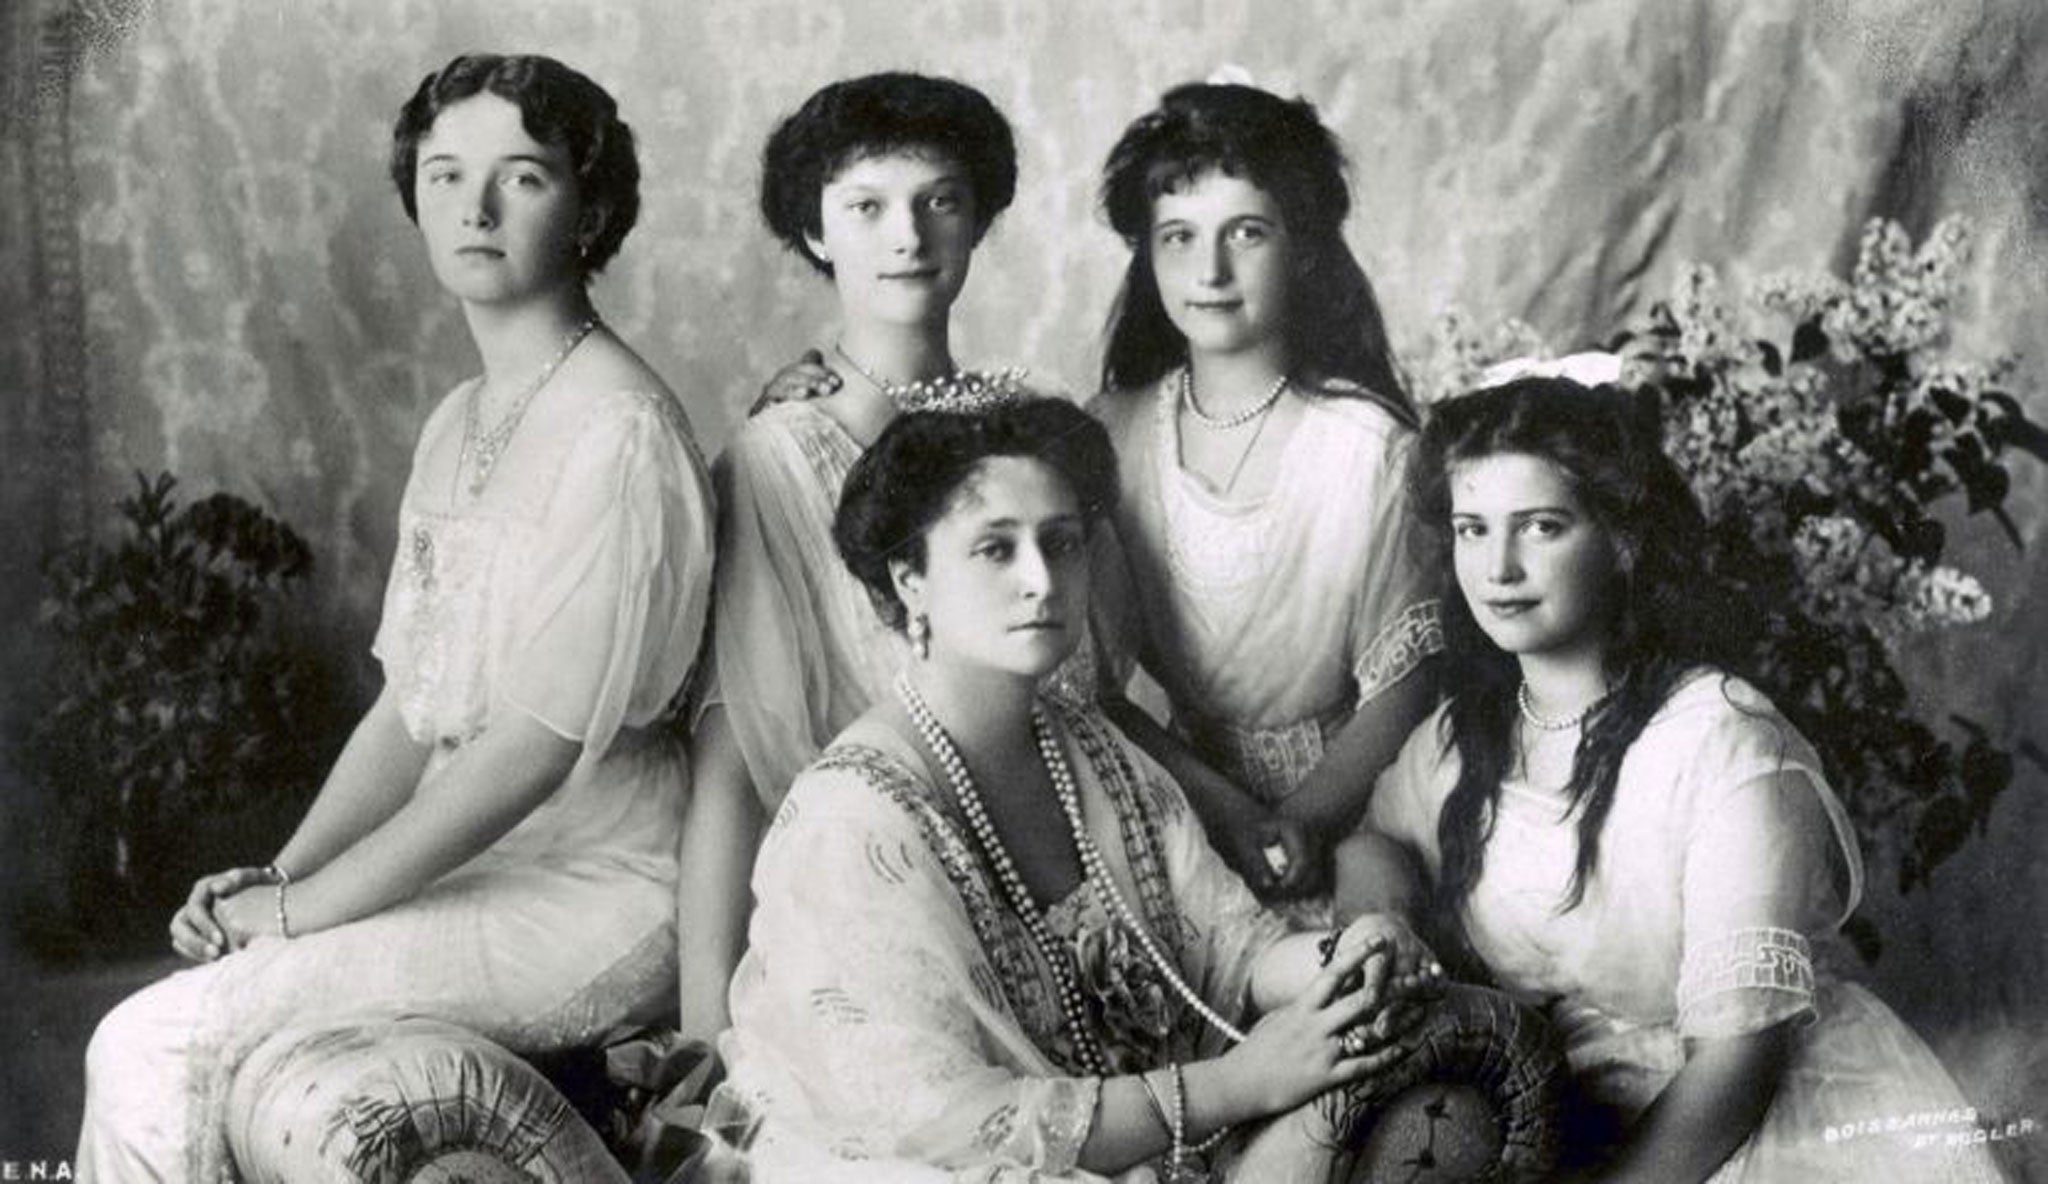 Olga, Tatiana, Maria and Anastasia were described as 'the most photographed princesses of their time'